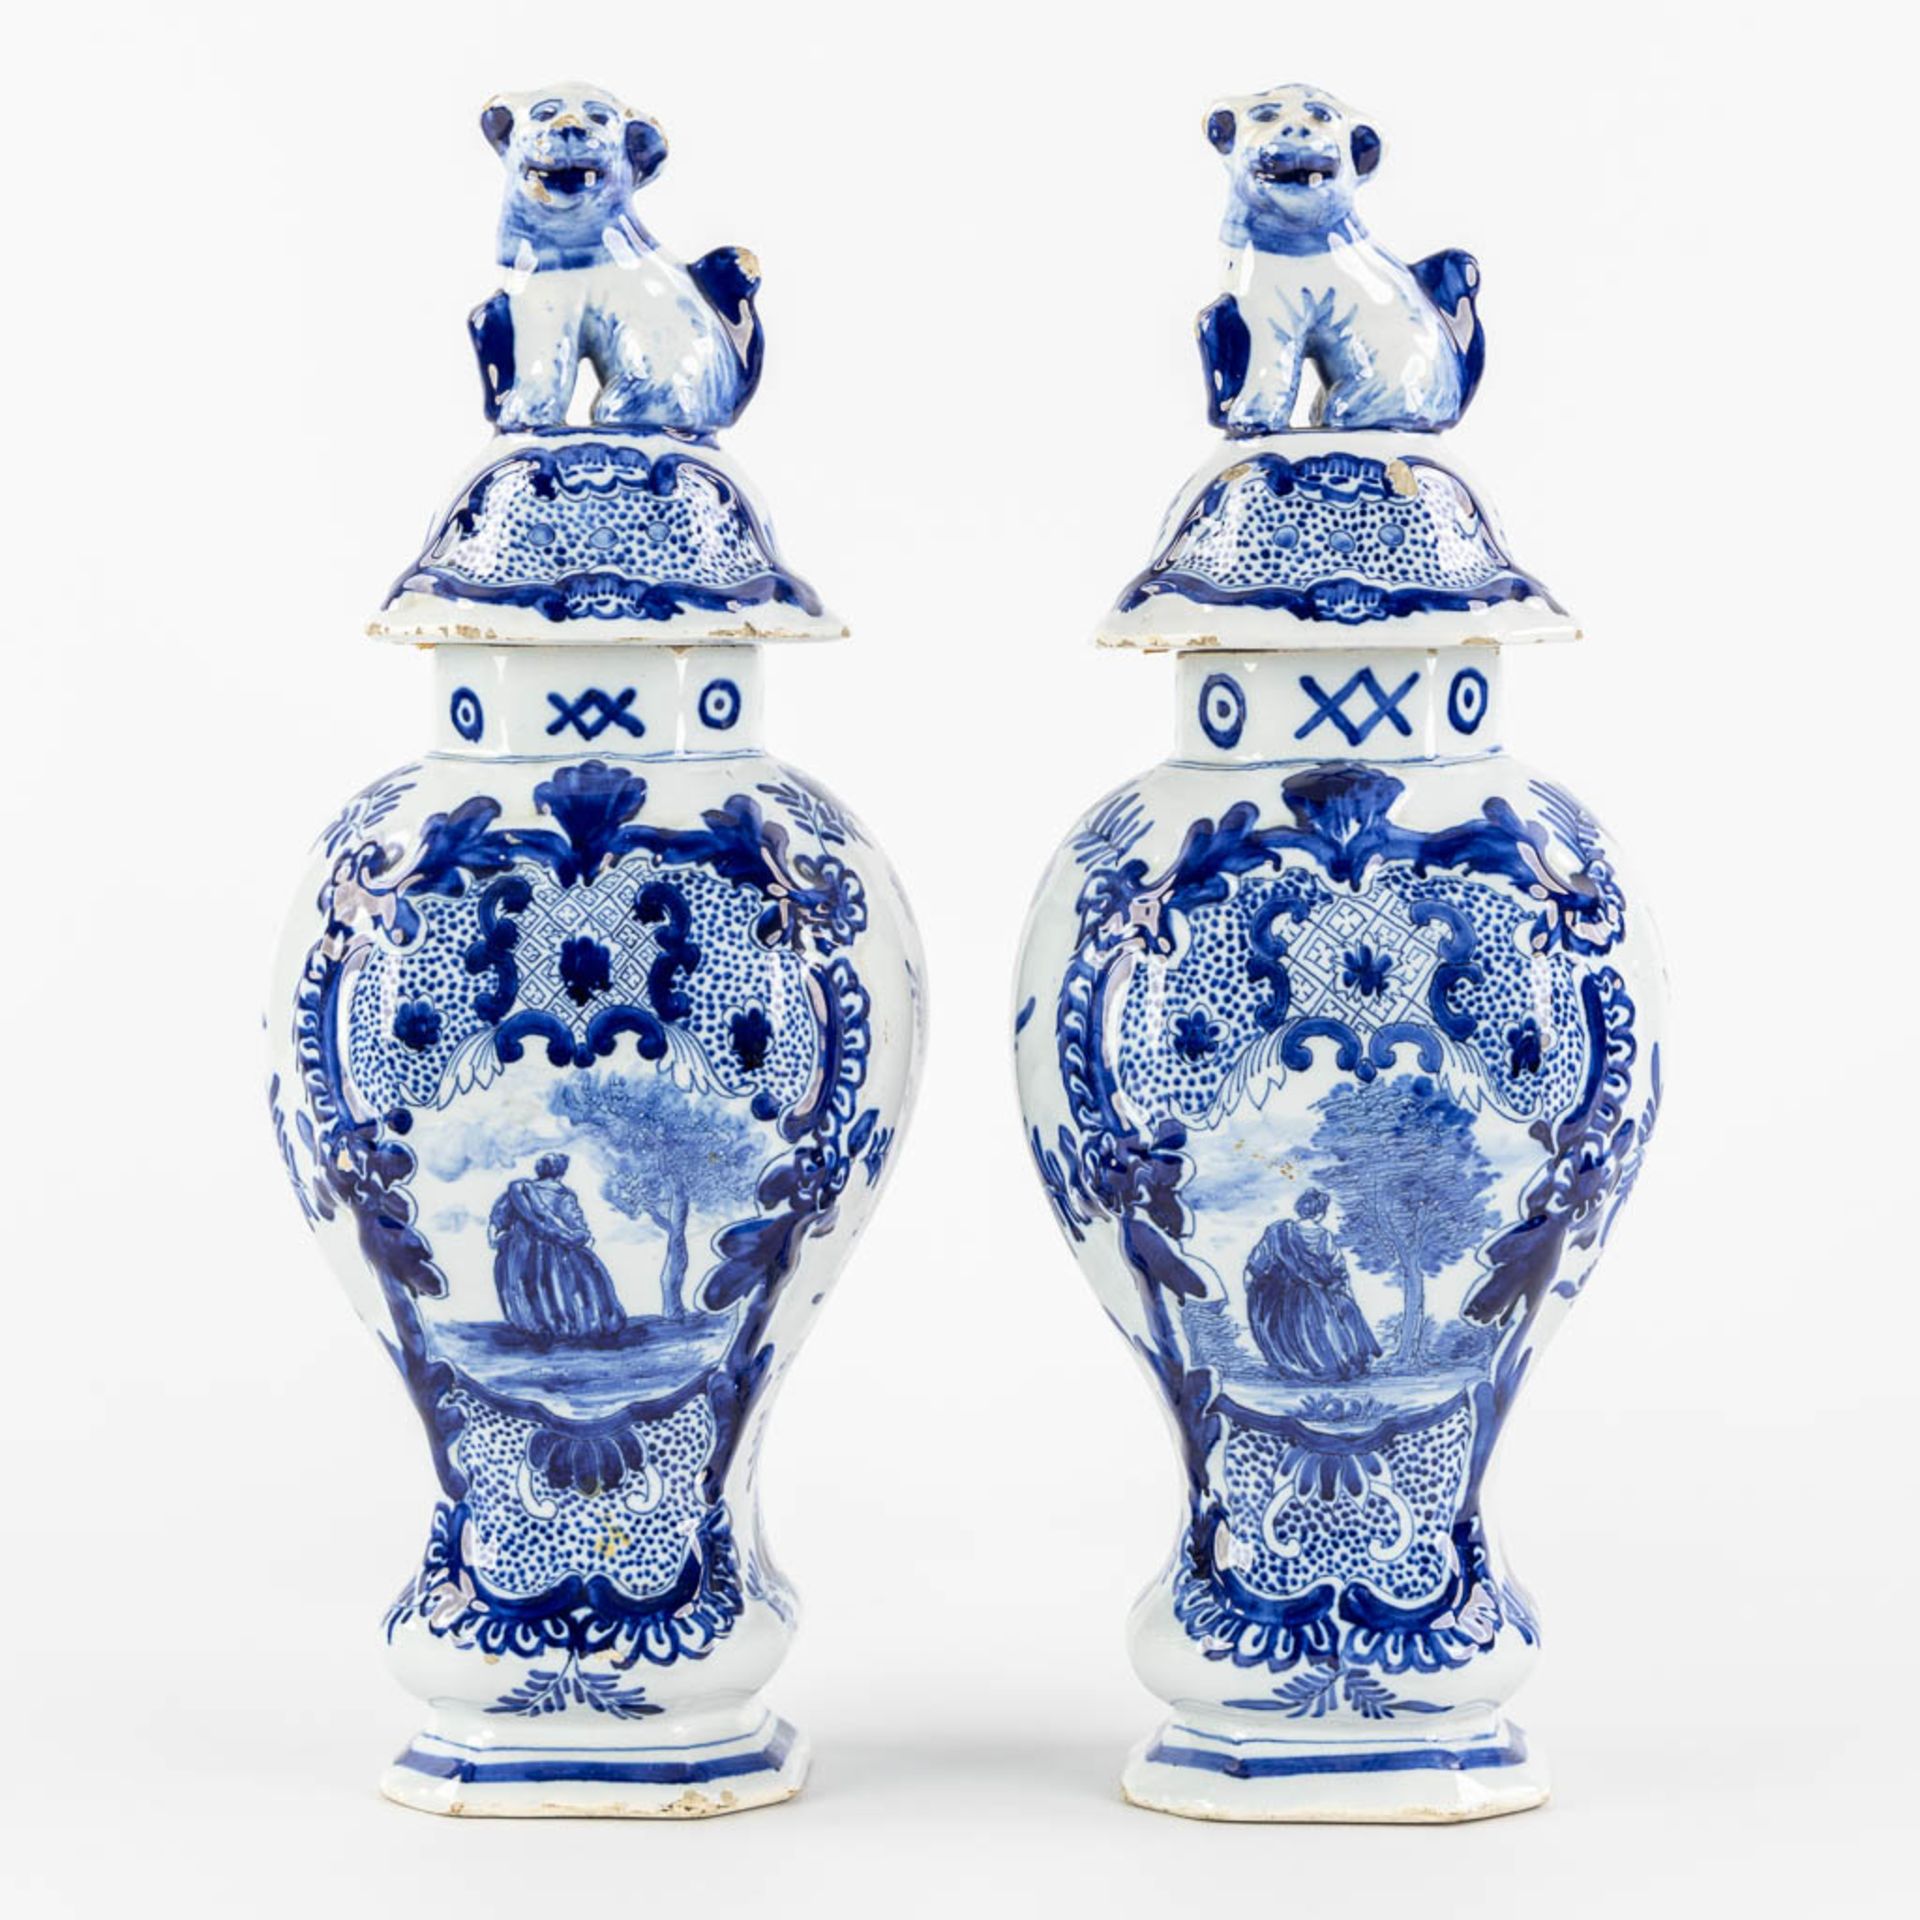 Delft, a collection of table accessories and plates. (L:11 x W:30 x H:28 cm) - Bild 5 aus 18